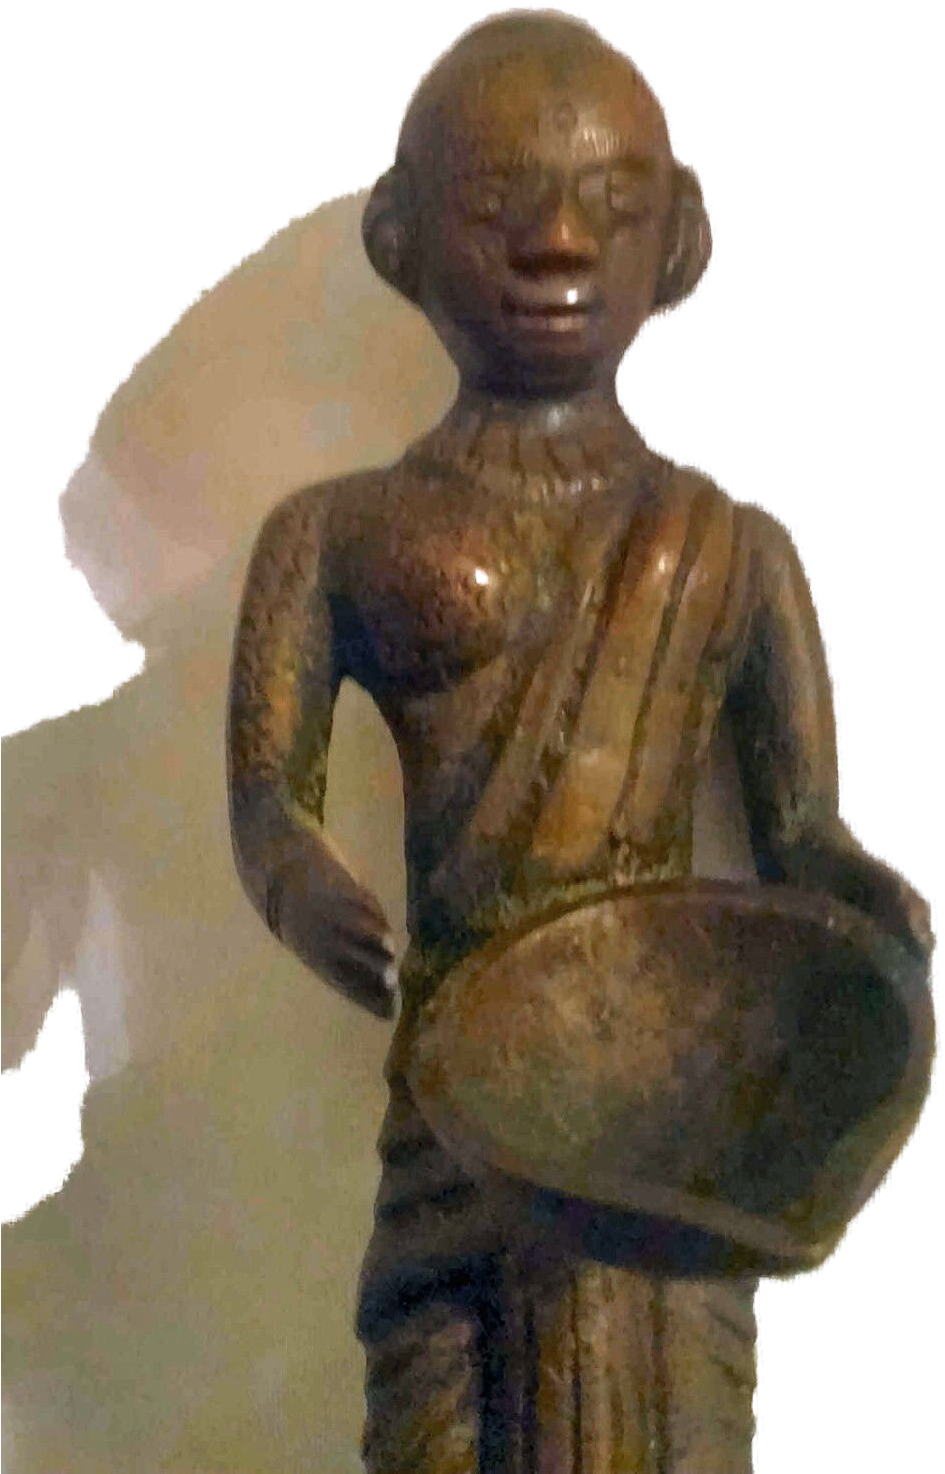 A Statue Of A Man Holding A Bowl